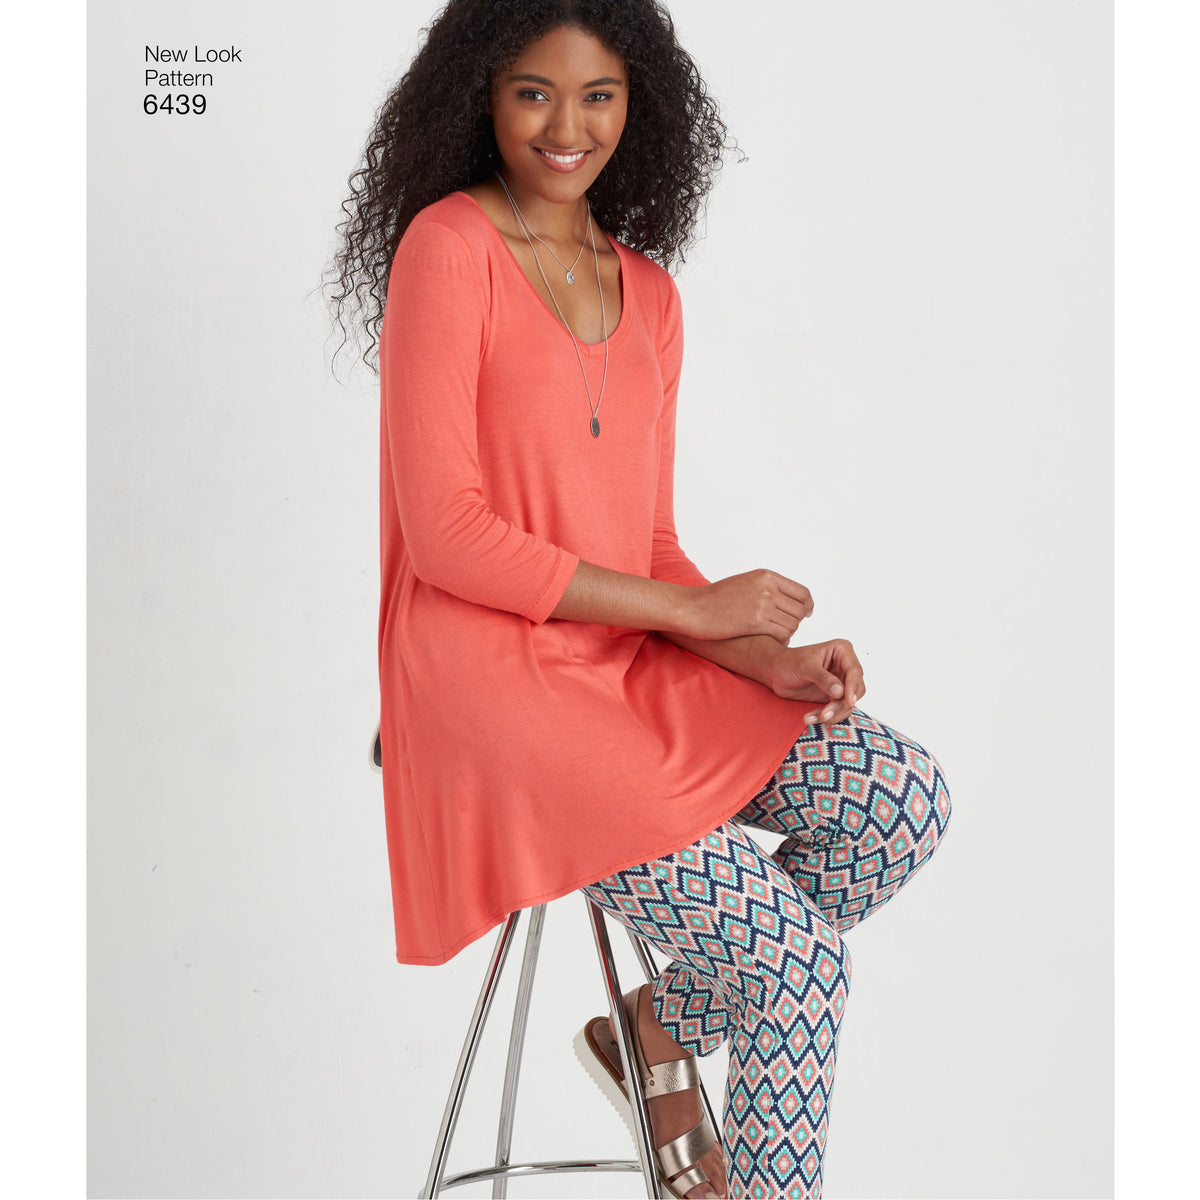 6439 Misses' Knit Tunics with Leggings